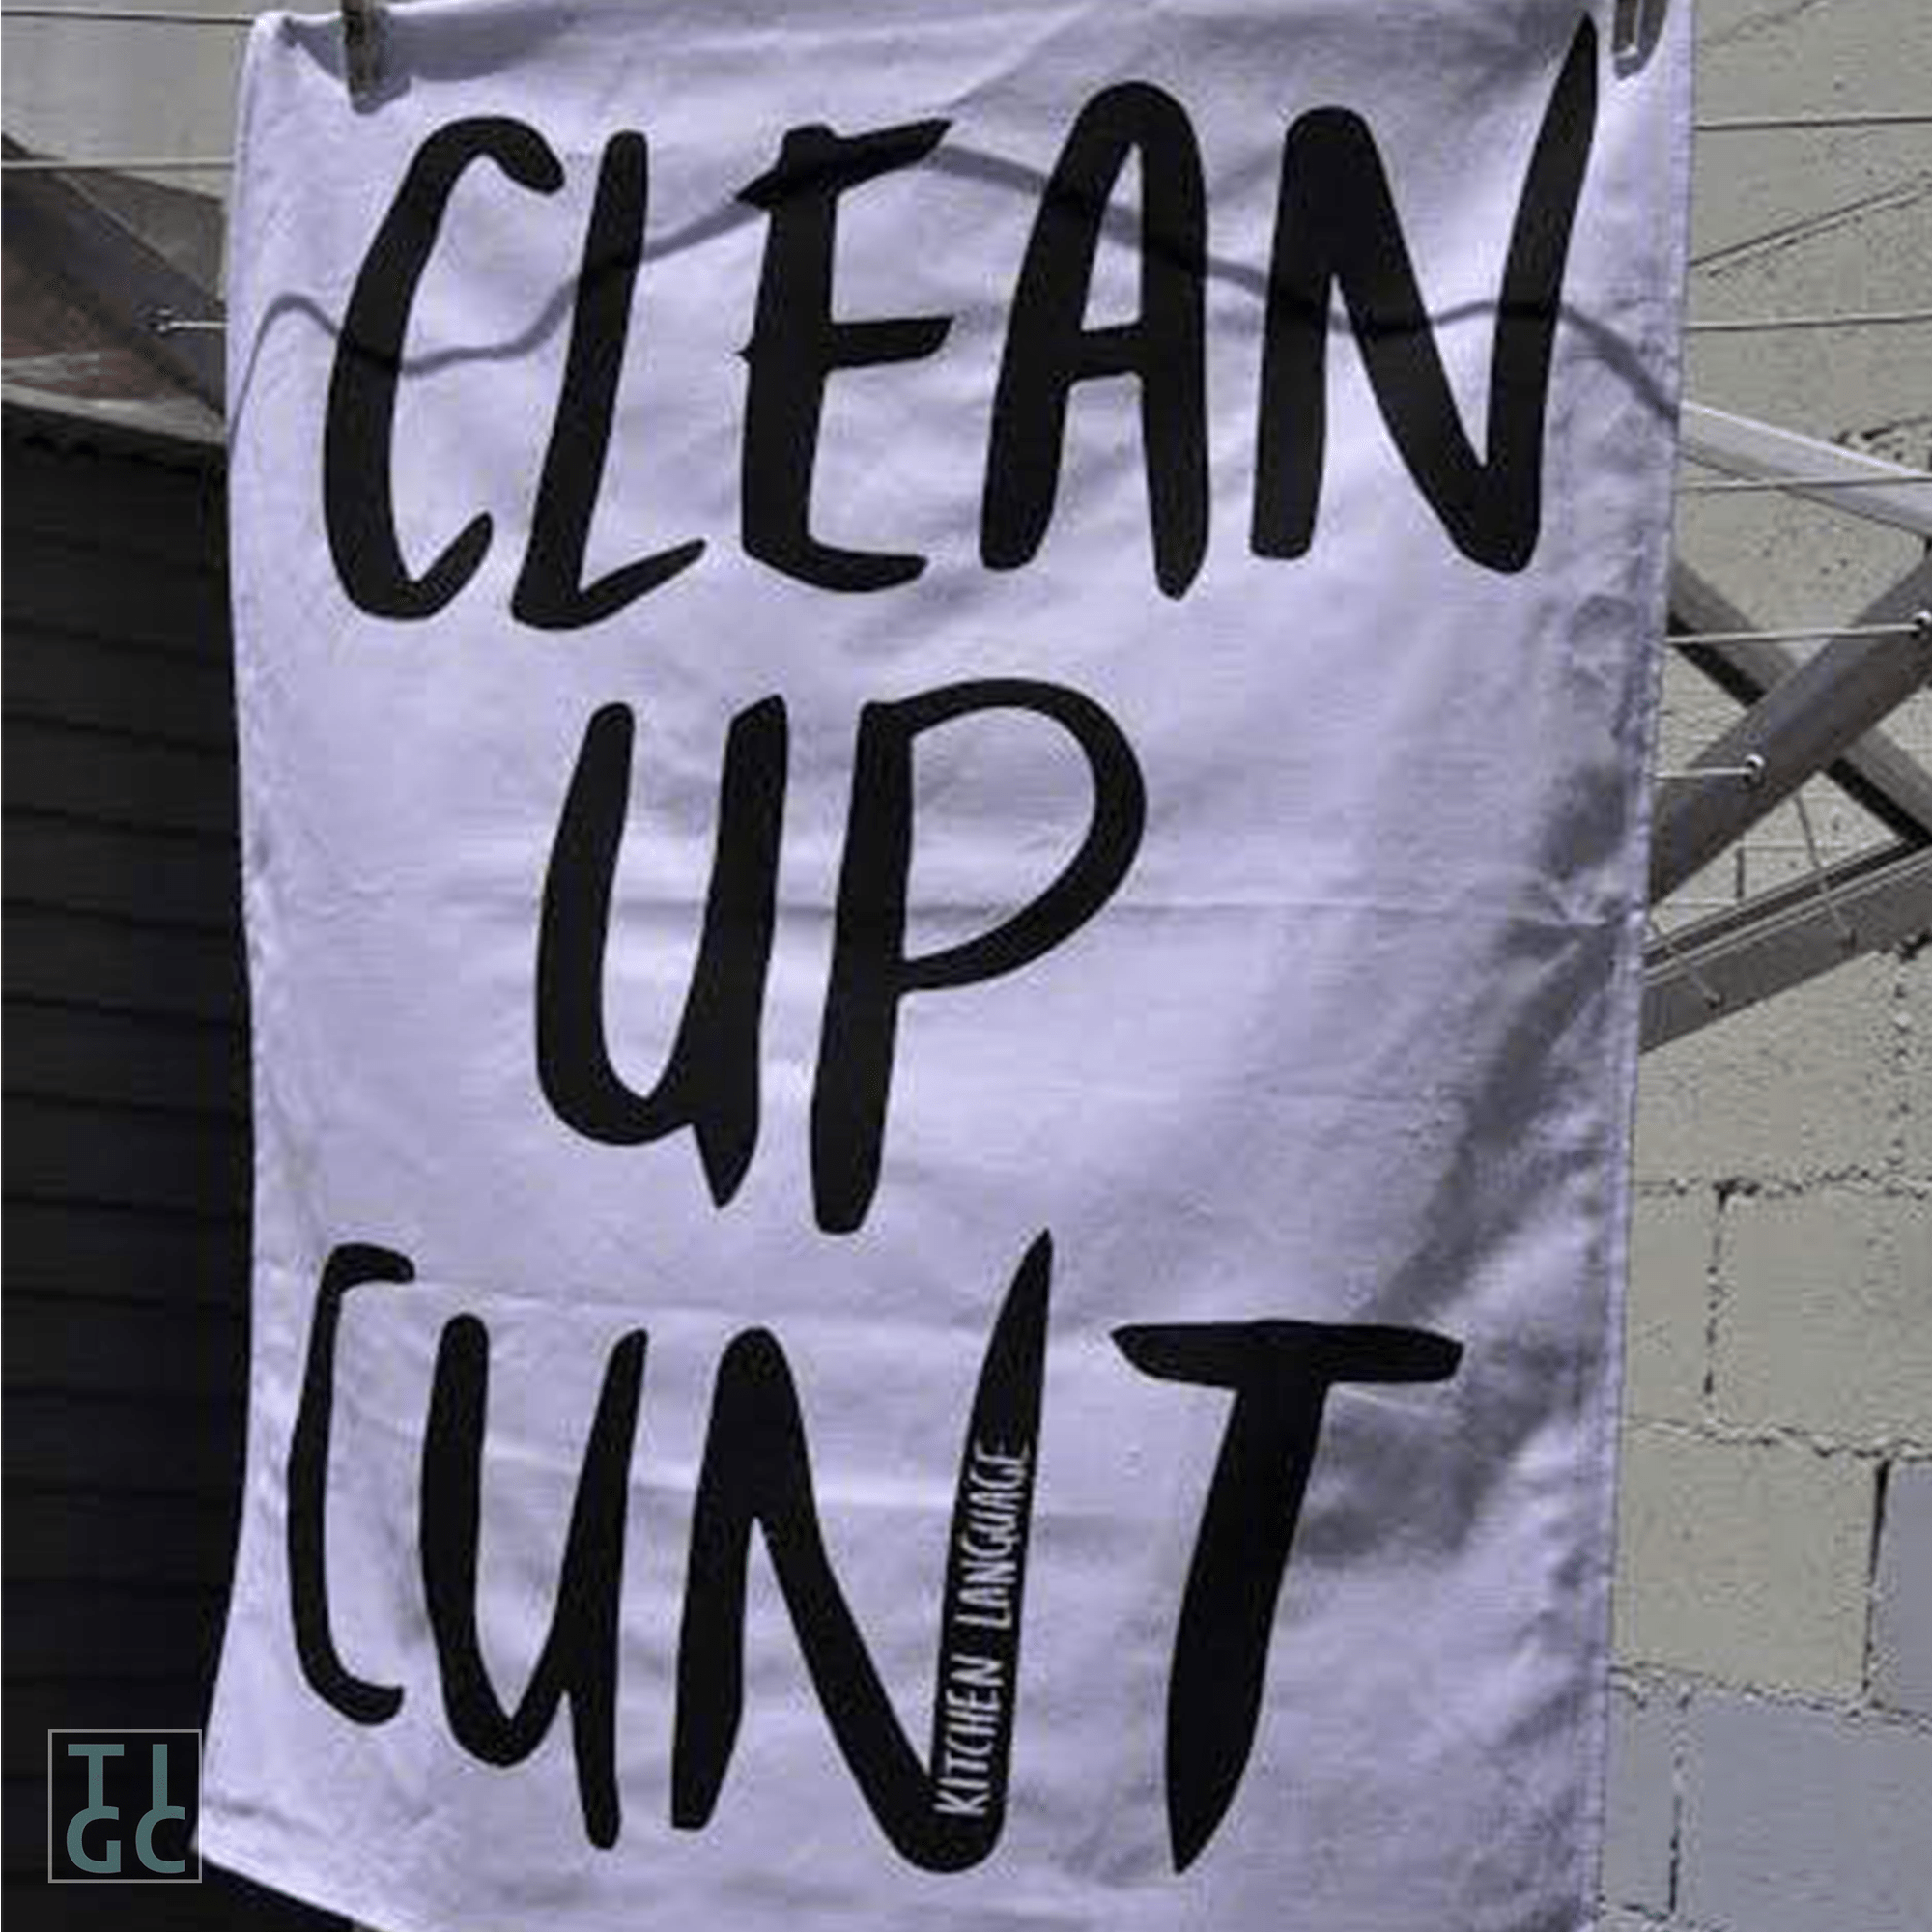 https://cdn.shopify.com/s/files/1/2423/8037/products/tigc-the-inappropriate-gift-co-clean-up-cunt-tea-towel-30382397063210_2000x.png?v=1675406037